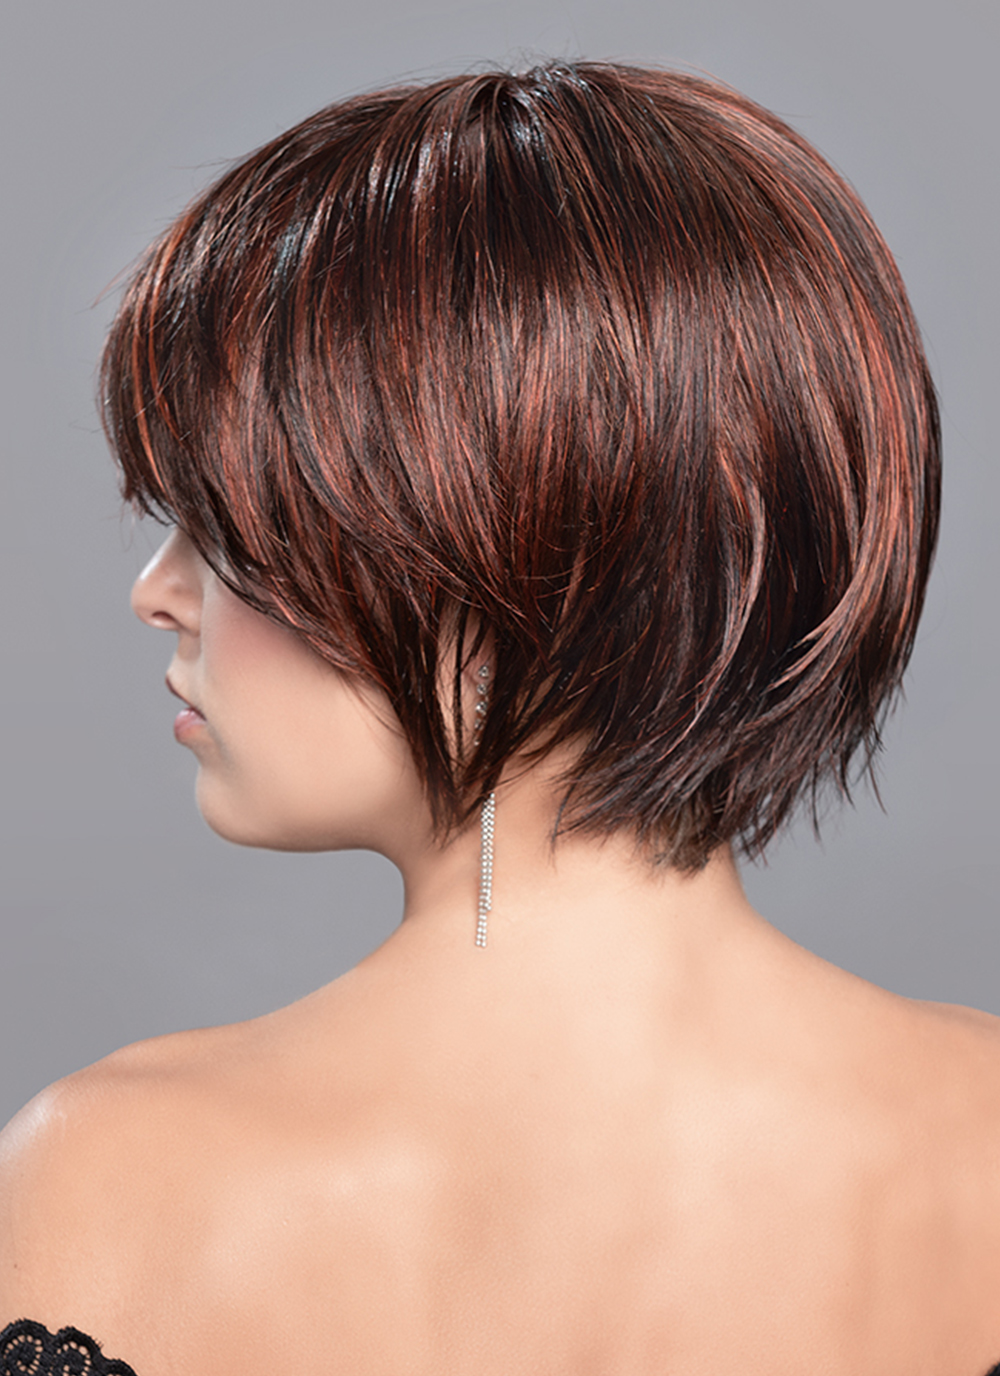 The Echo from Ellen Wille is a fabulously, modern bob style wig with a longer side sweeping fringe.